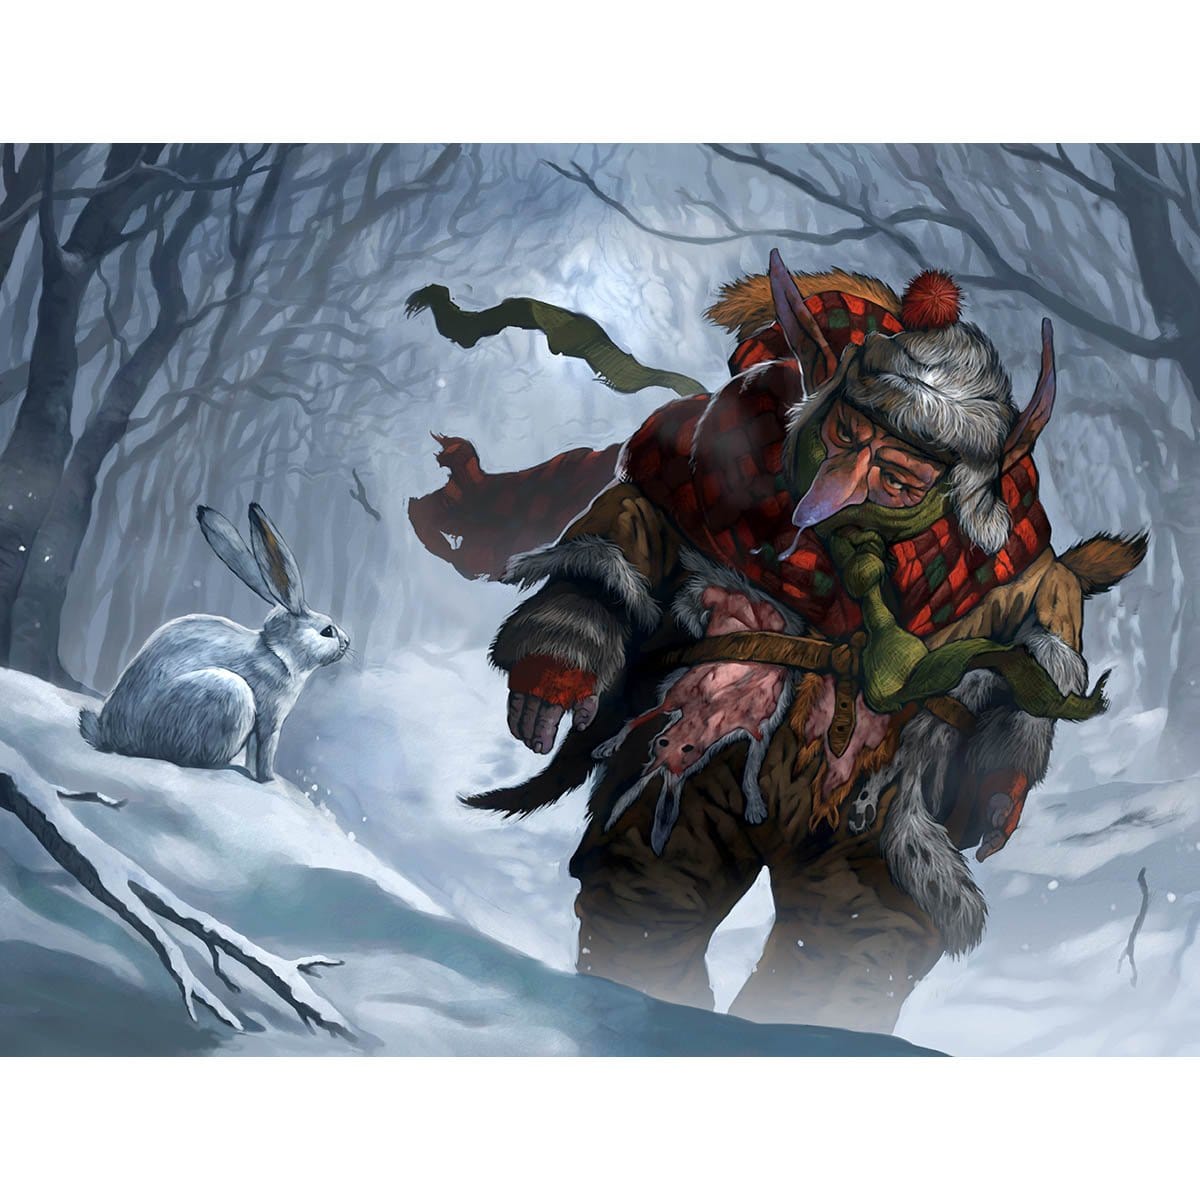 Goblin Furrier Print - Print - Original Magic Art - Accessories for Magic the Gathering and other card games